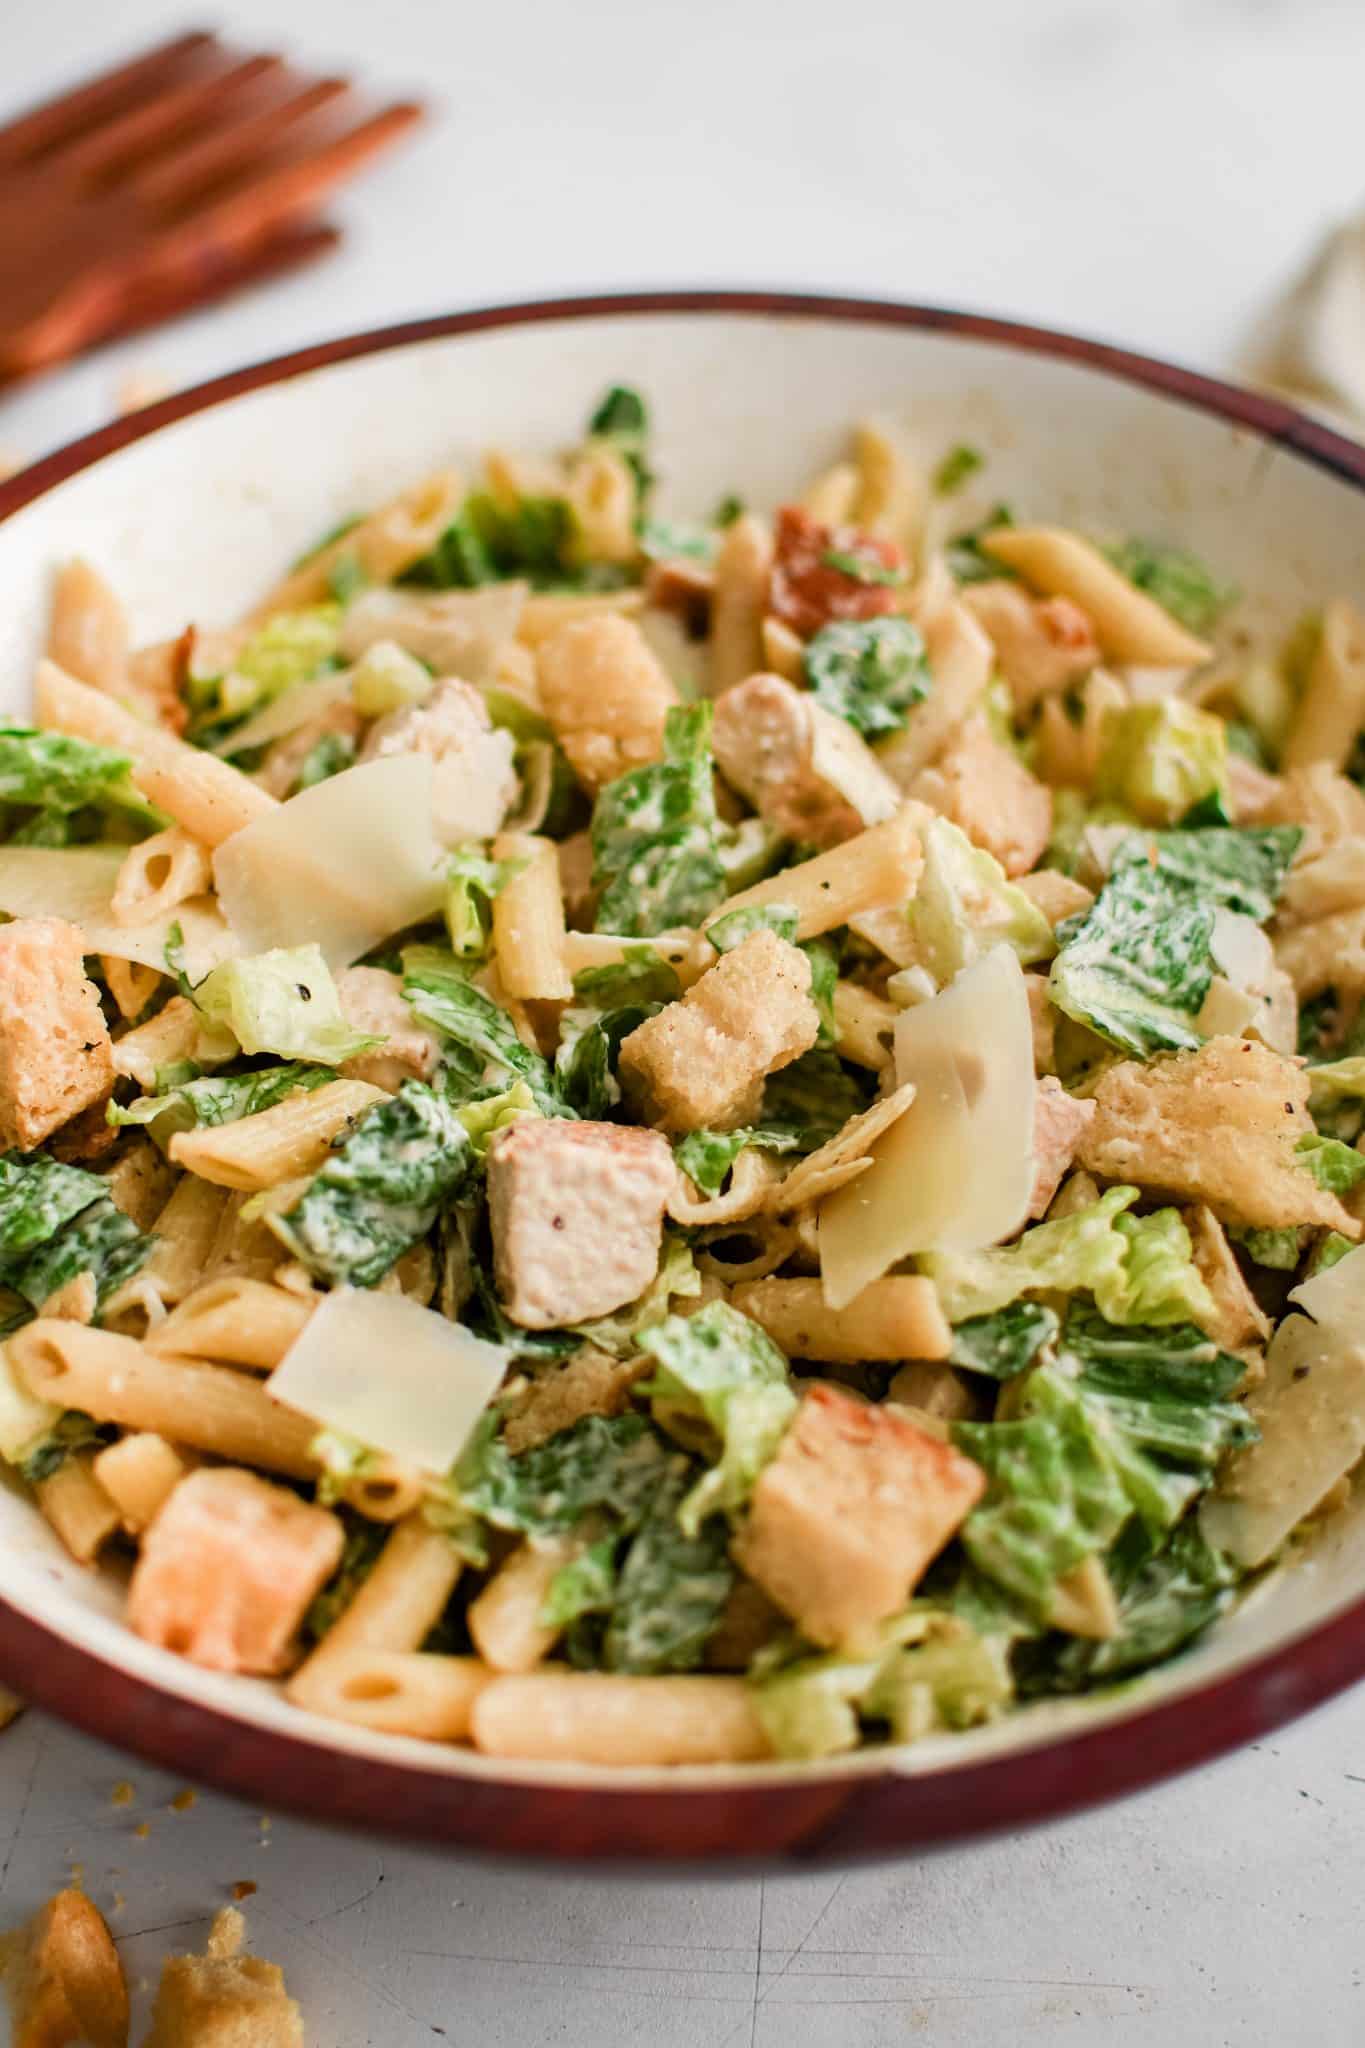 Large salad bowl filled with chicken Caesar pasta salad filled with Romaine lettuce, croutons, chicken, and penne pasta tossed in Caesar salad dressing.